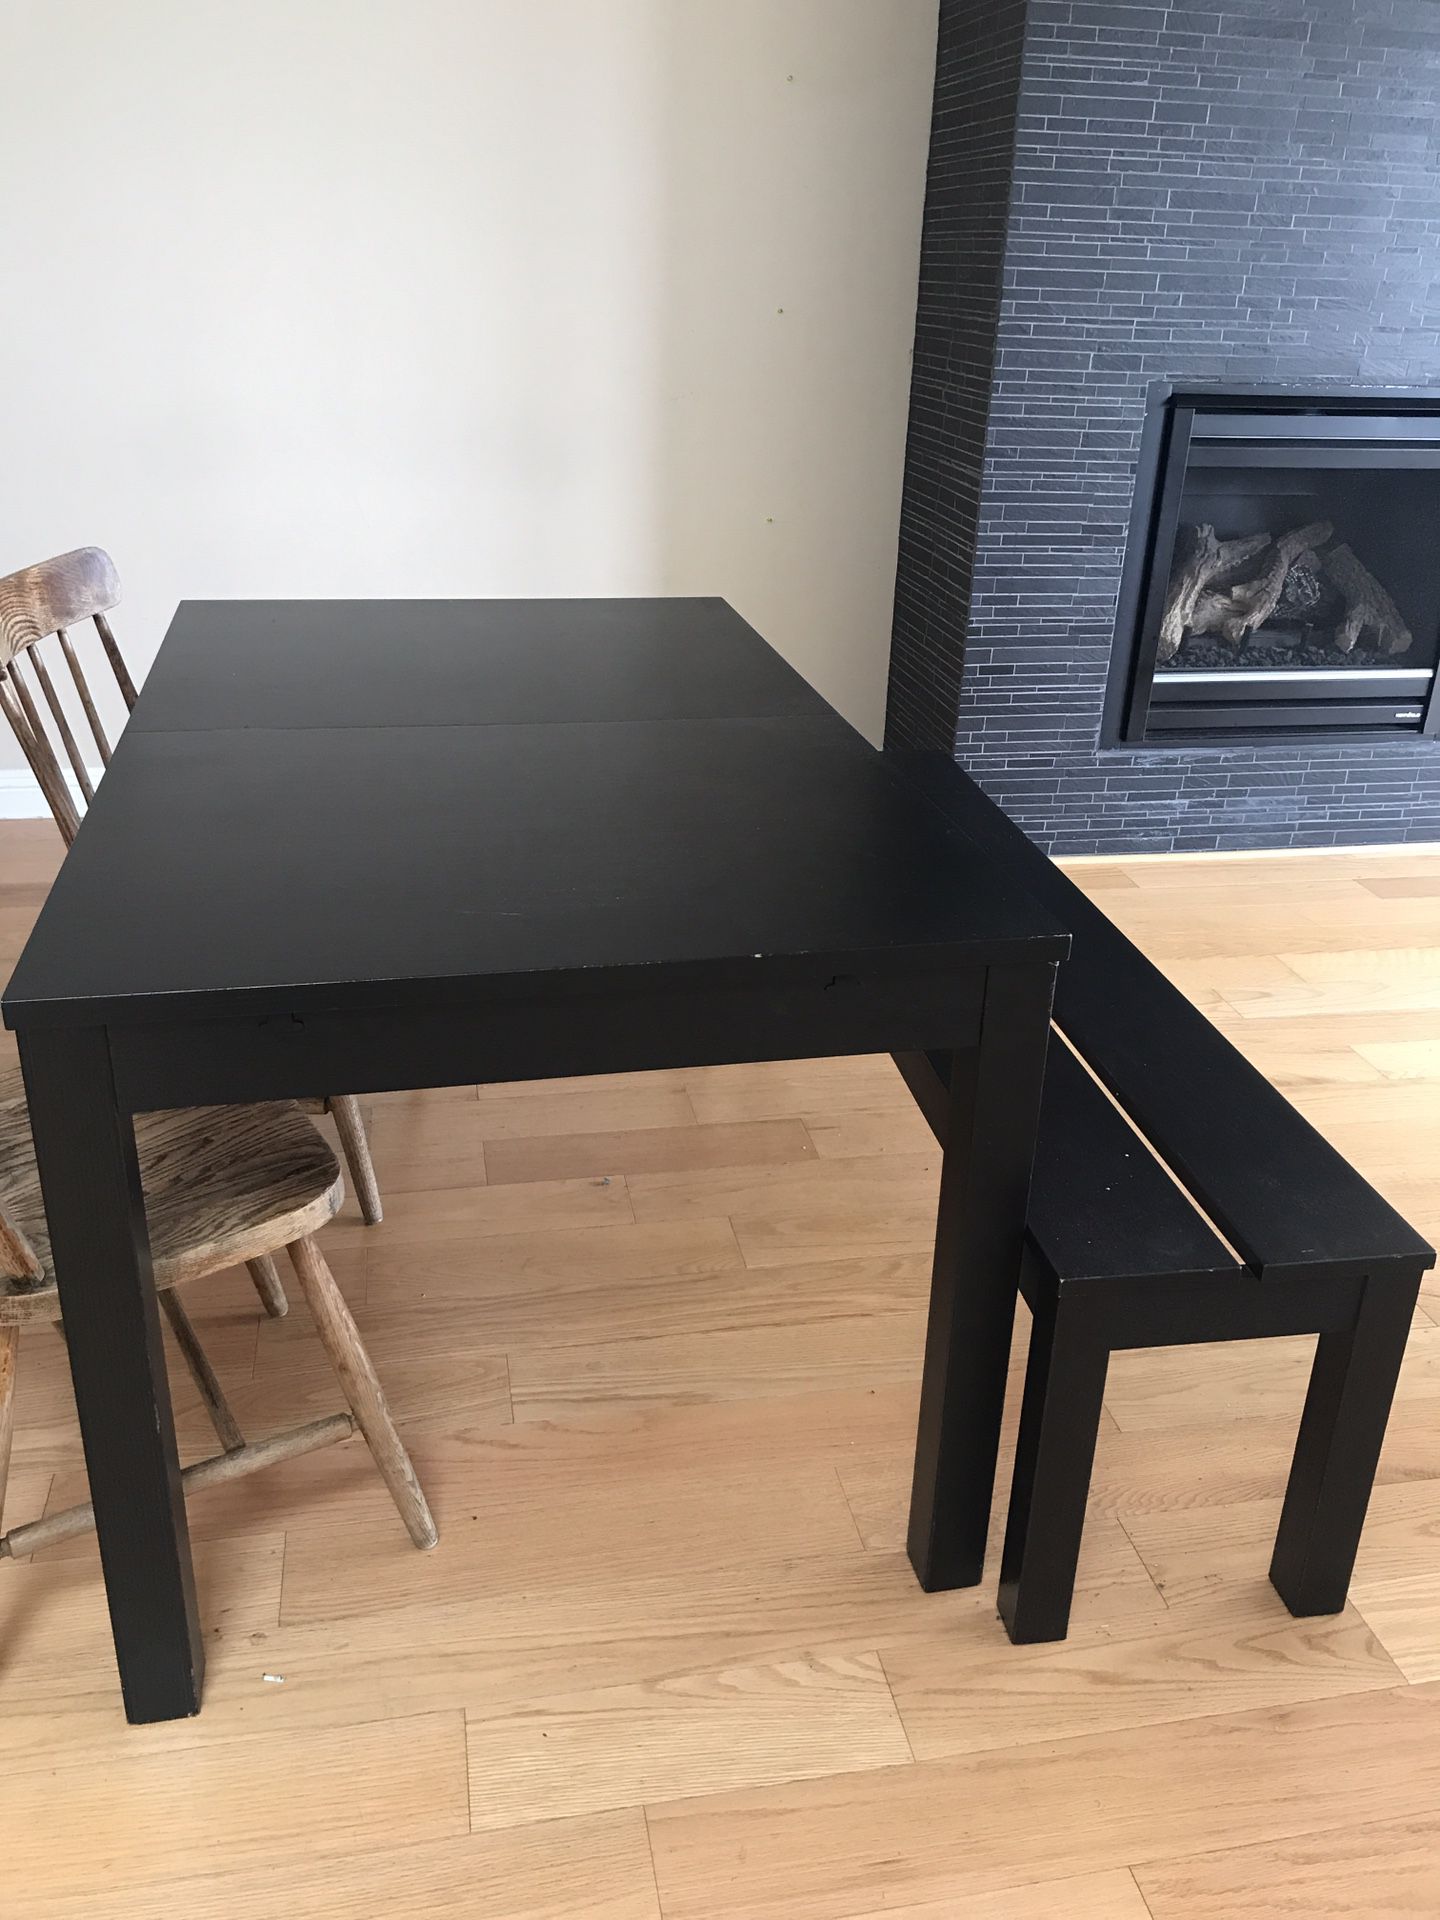 Dining Table with bench